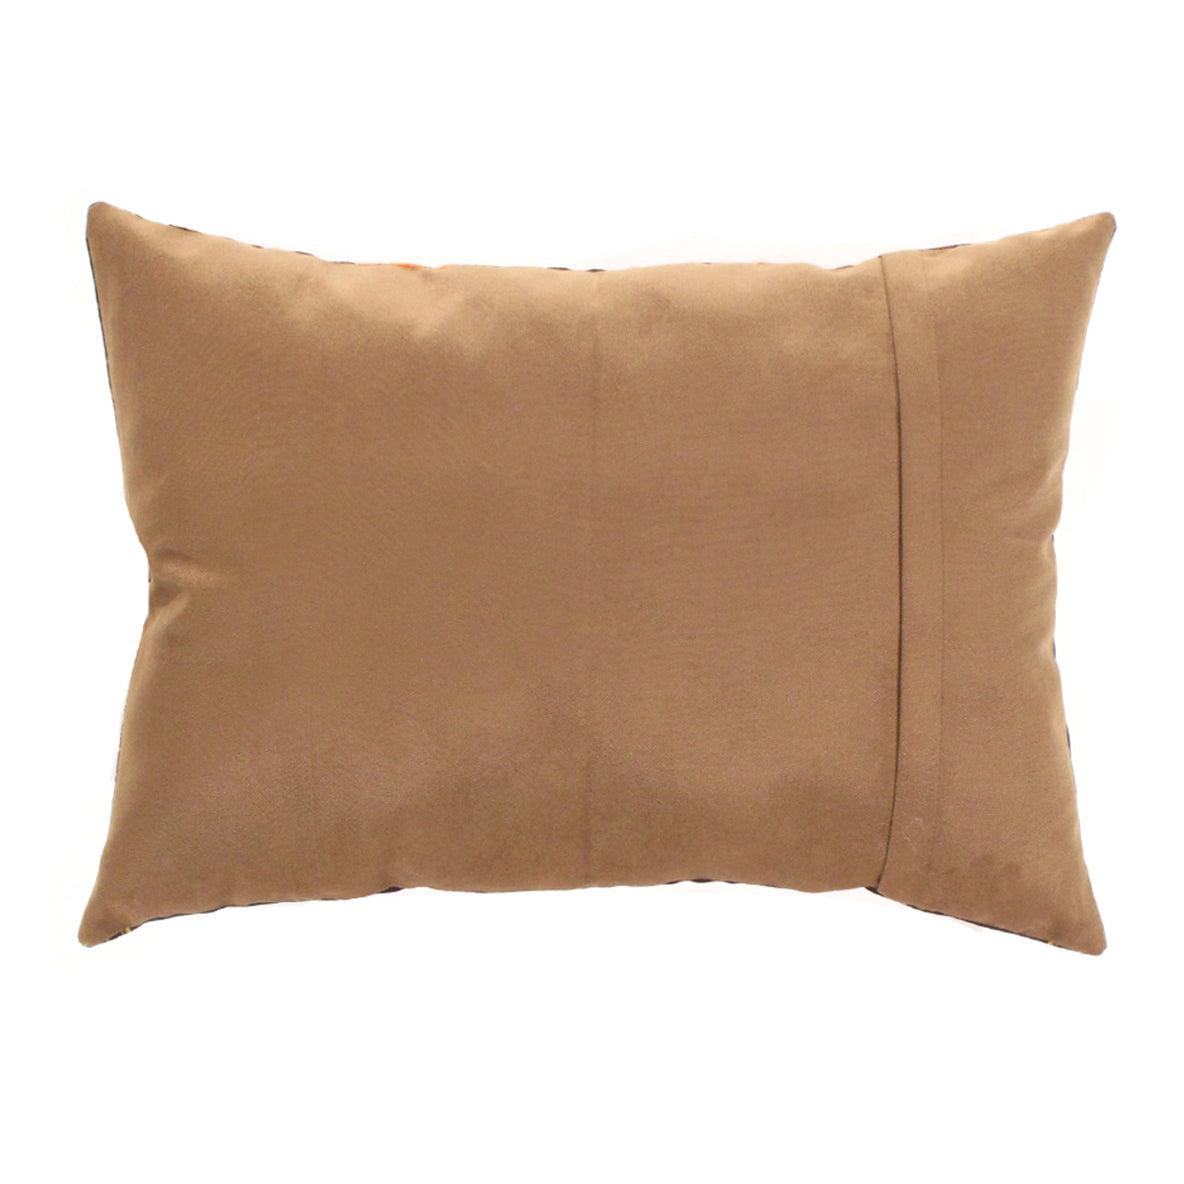 Canvello Traditional Silkroad Velvet Pillow - 18' X 26' - Canvello